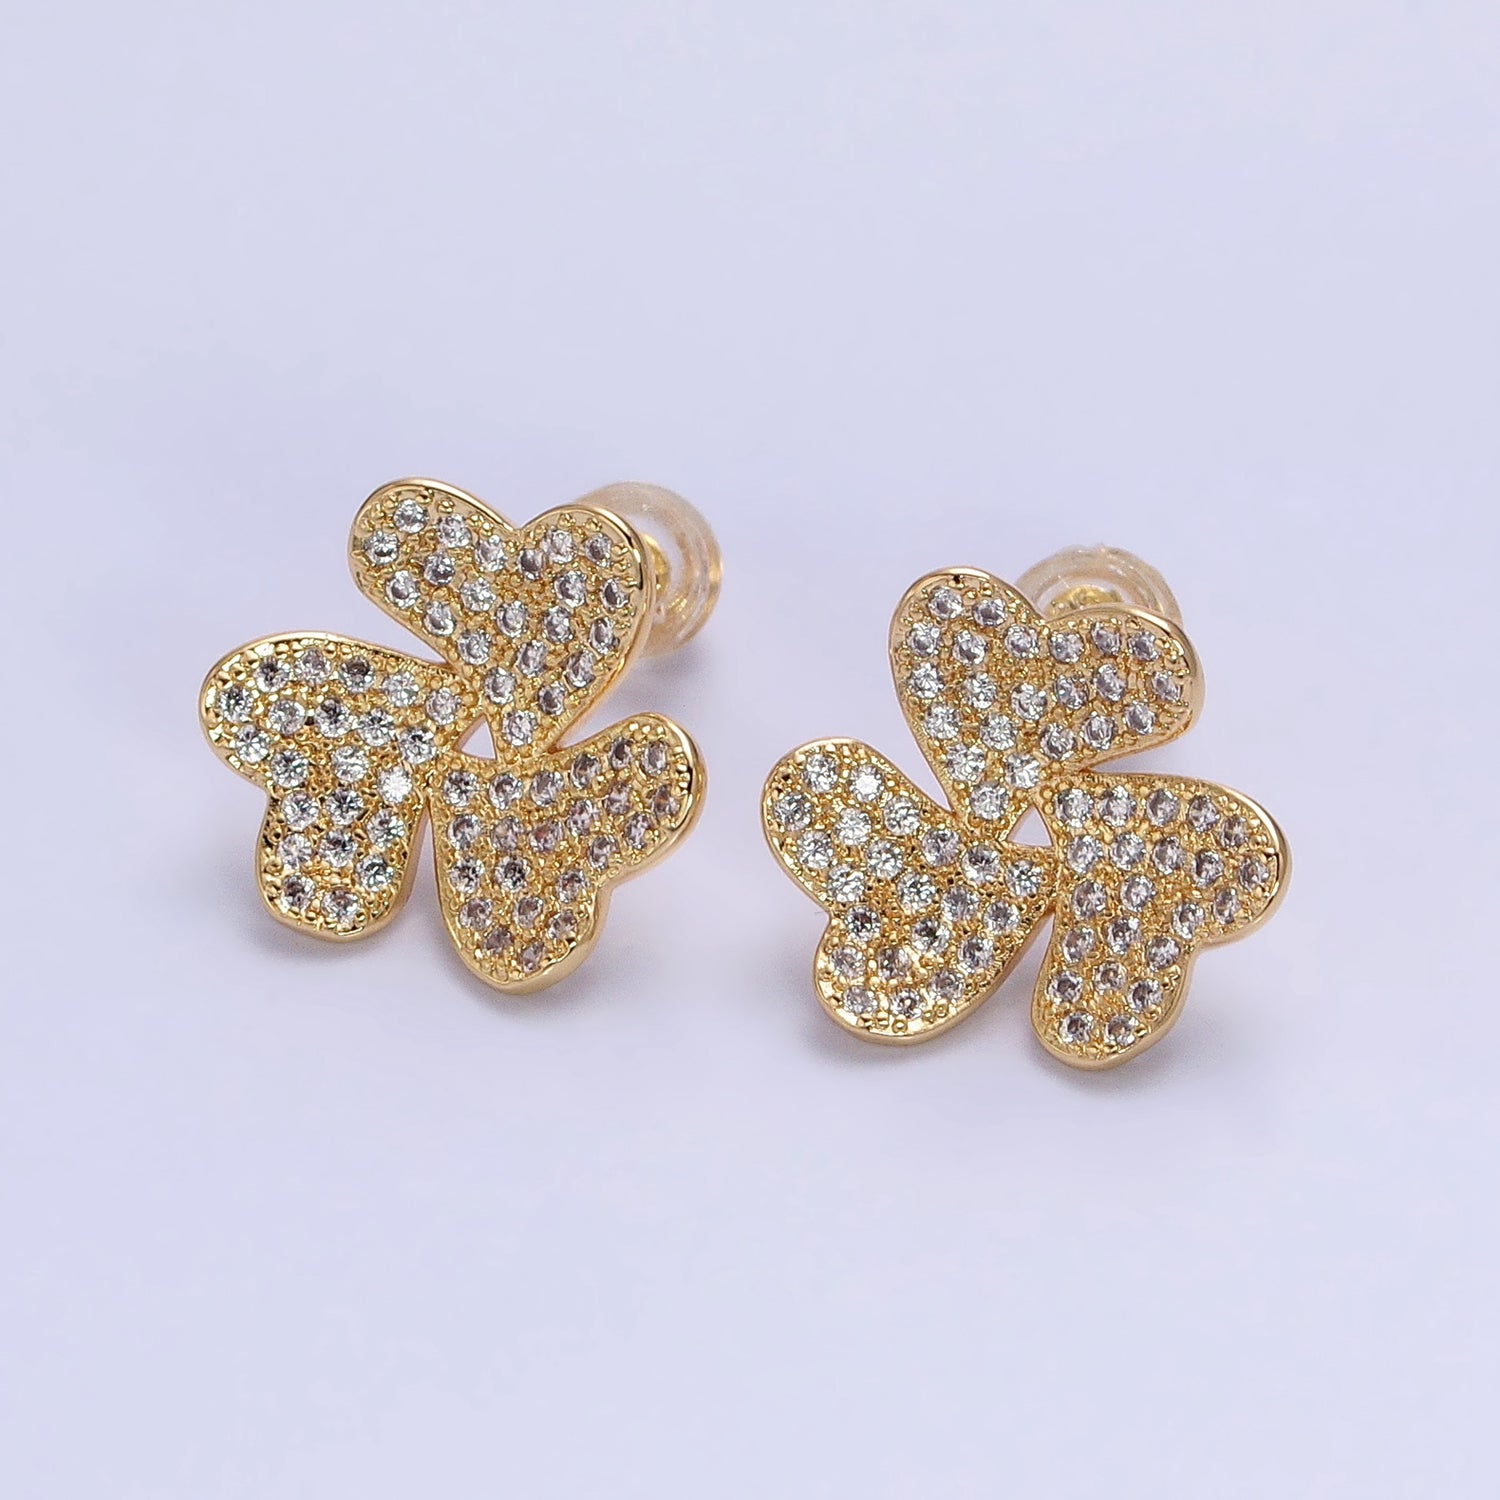 Silver, Gold Triple Micro Paved CZ Heart Flower Love Stud Earrings | AB961 AB972 - DLUXCA